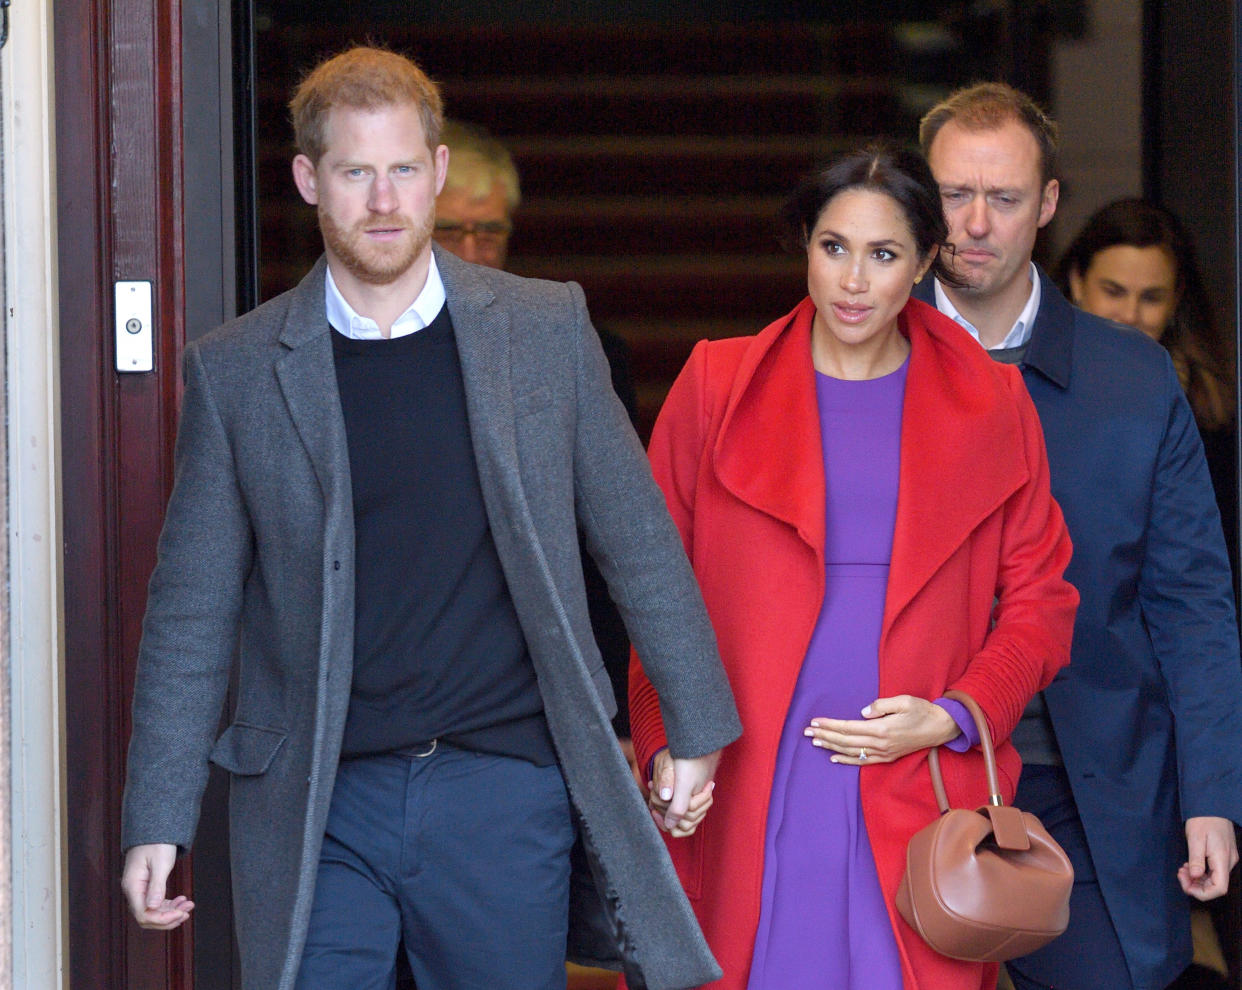 Prince Harry and Meghan Markle’s move to Windsor has been postponed. Photo: Getty Images